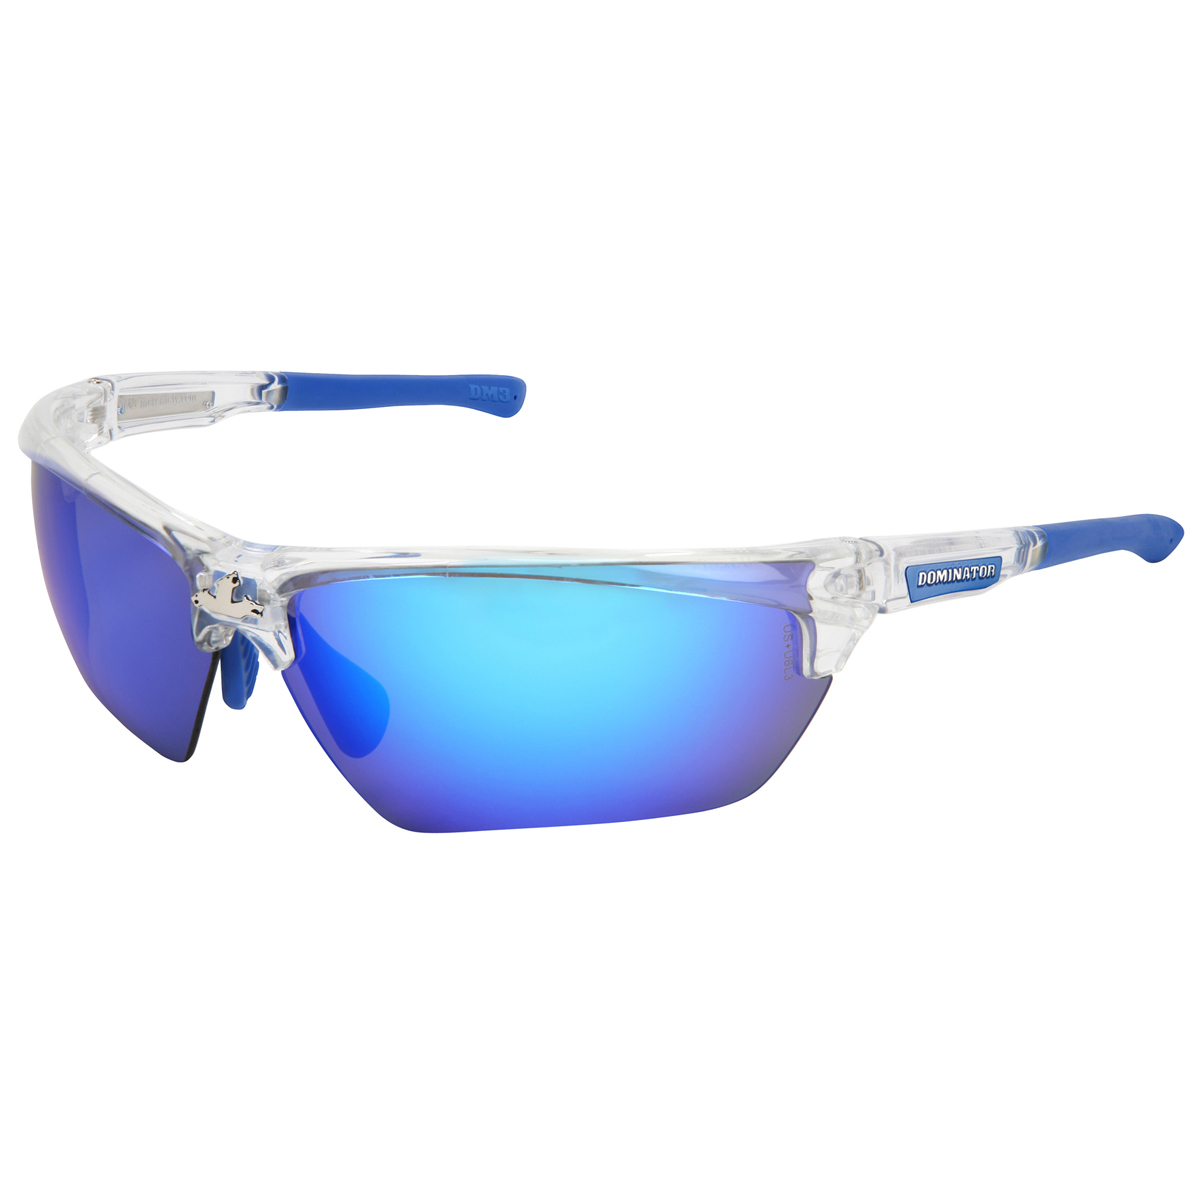 MCR Safety® Dominator™ DM3 Clear And Blue Safety Glasses With Blue Mirror/Hard Coat Lens And Thermal Plastic Rubber (TPR) Temple